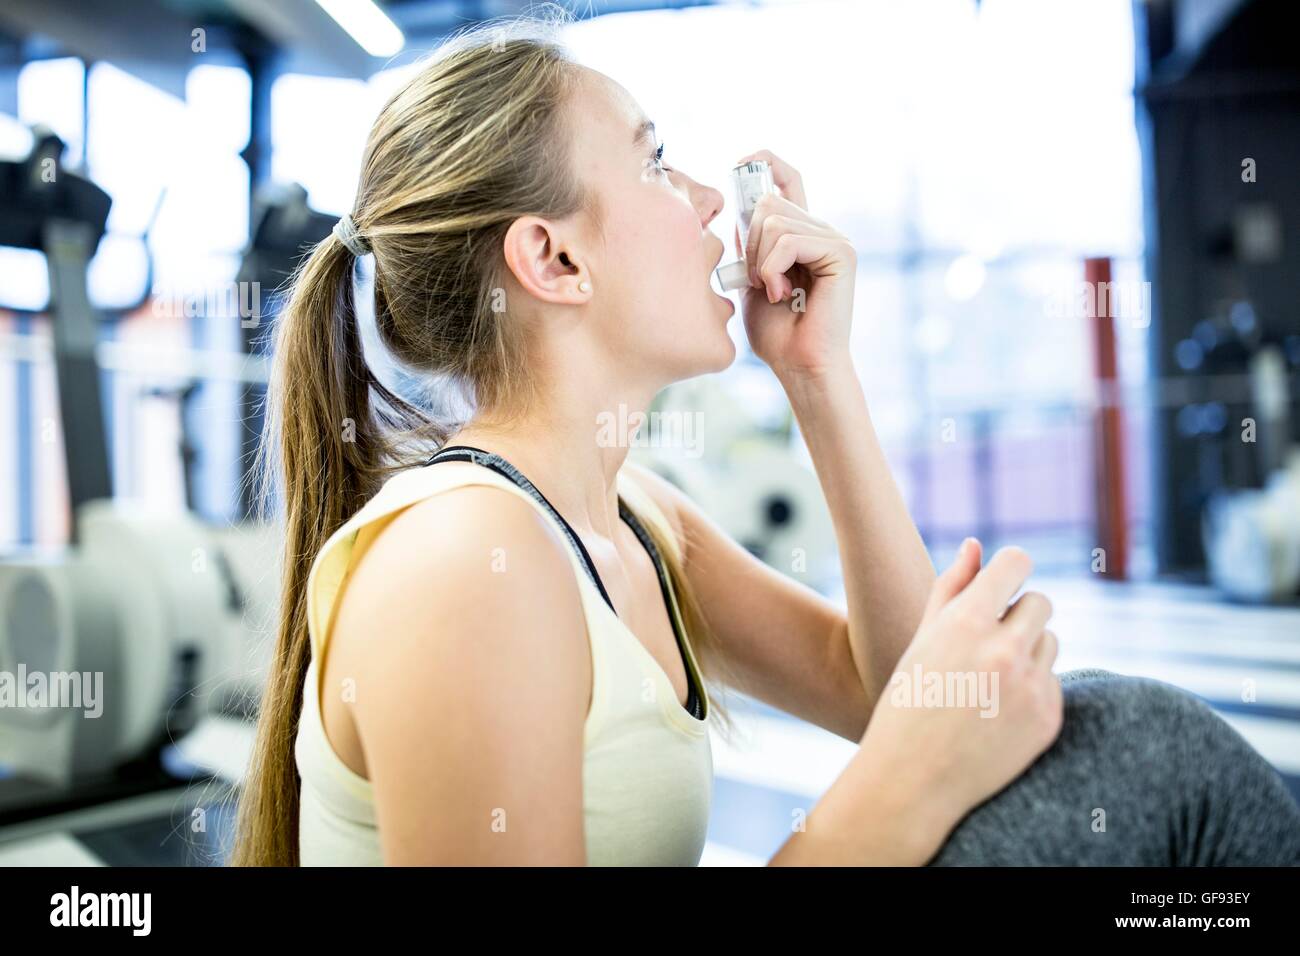 PROPERTY RELEASED. MODEL RELEASED. Young woman using inhaler in gym. Stock Photo